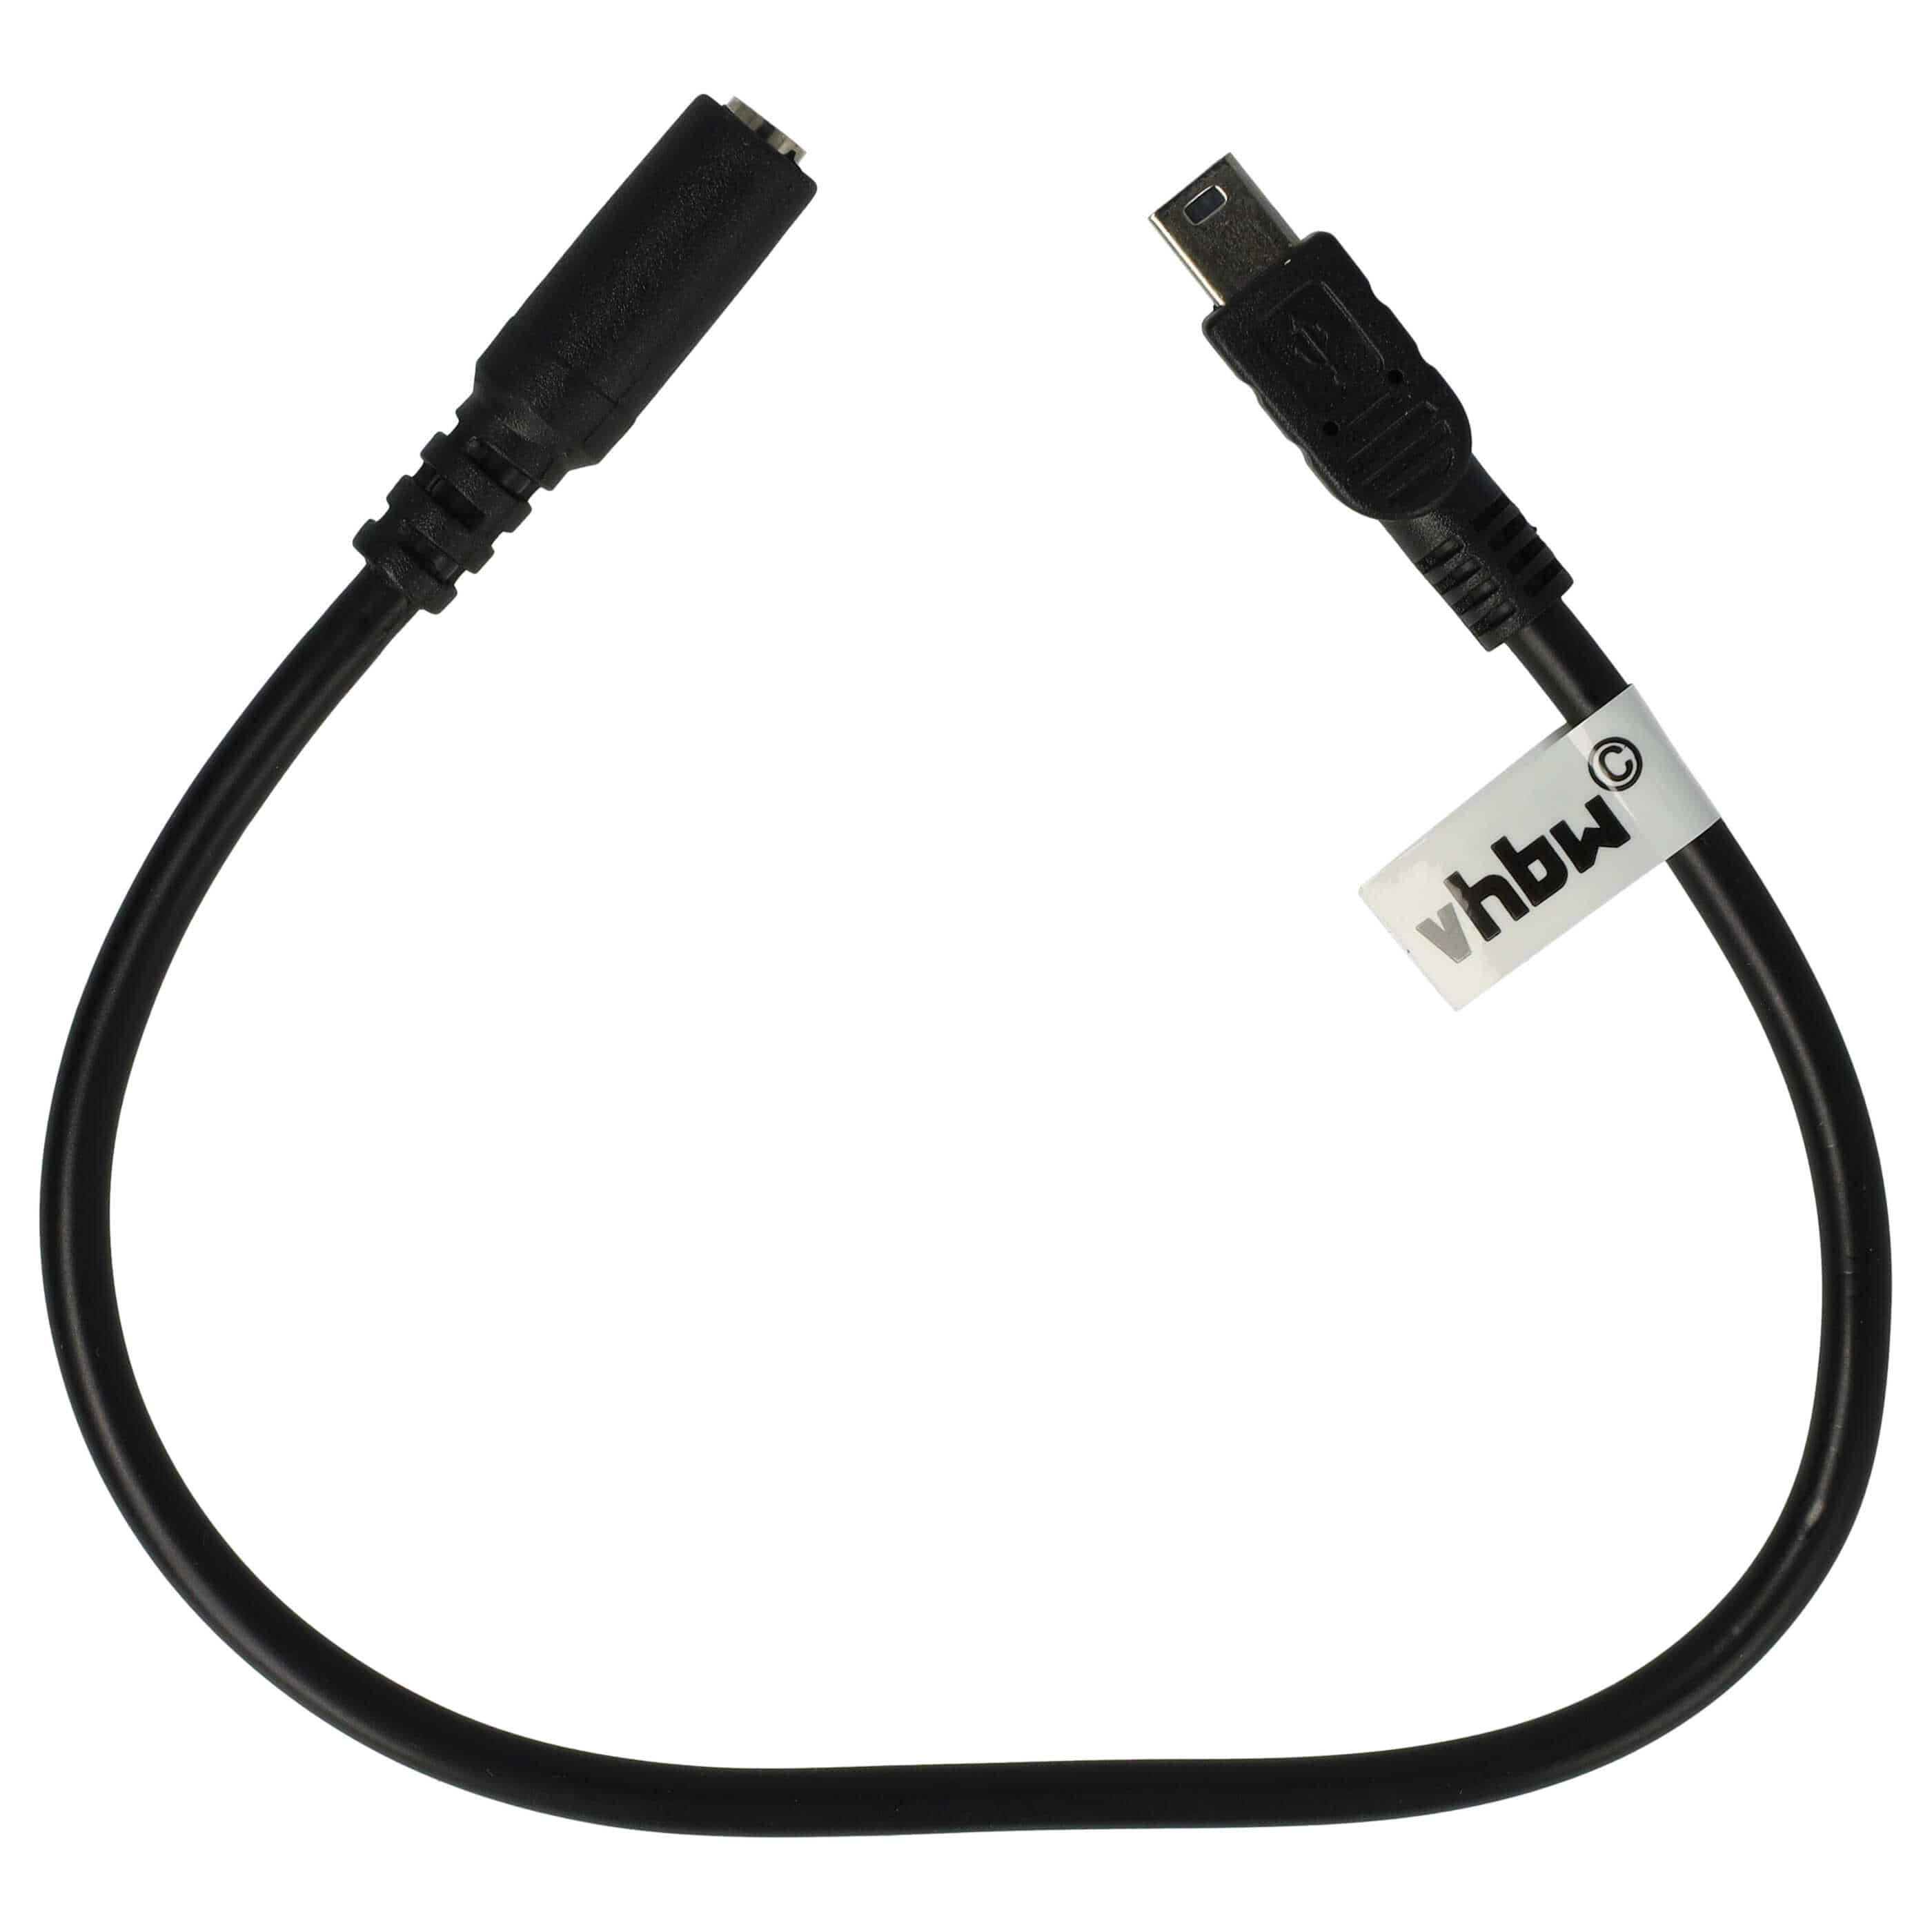 Mini USB to Jack Cable for GoPro Hero Action Cameras etc. - Adapter Cable